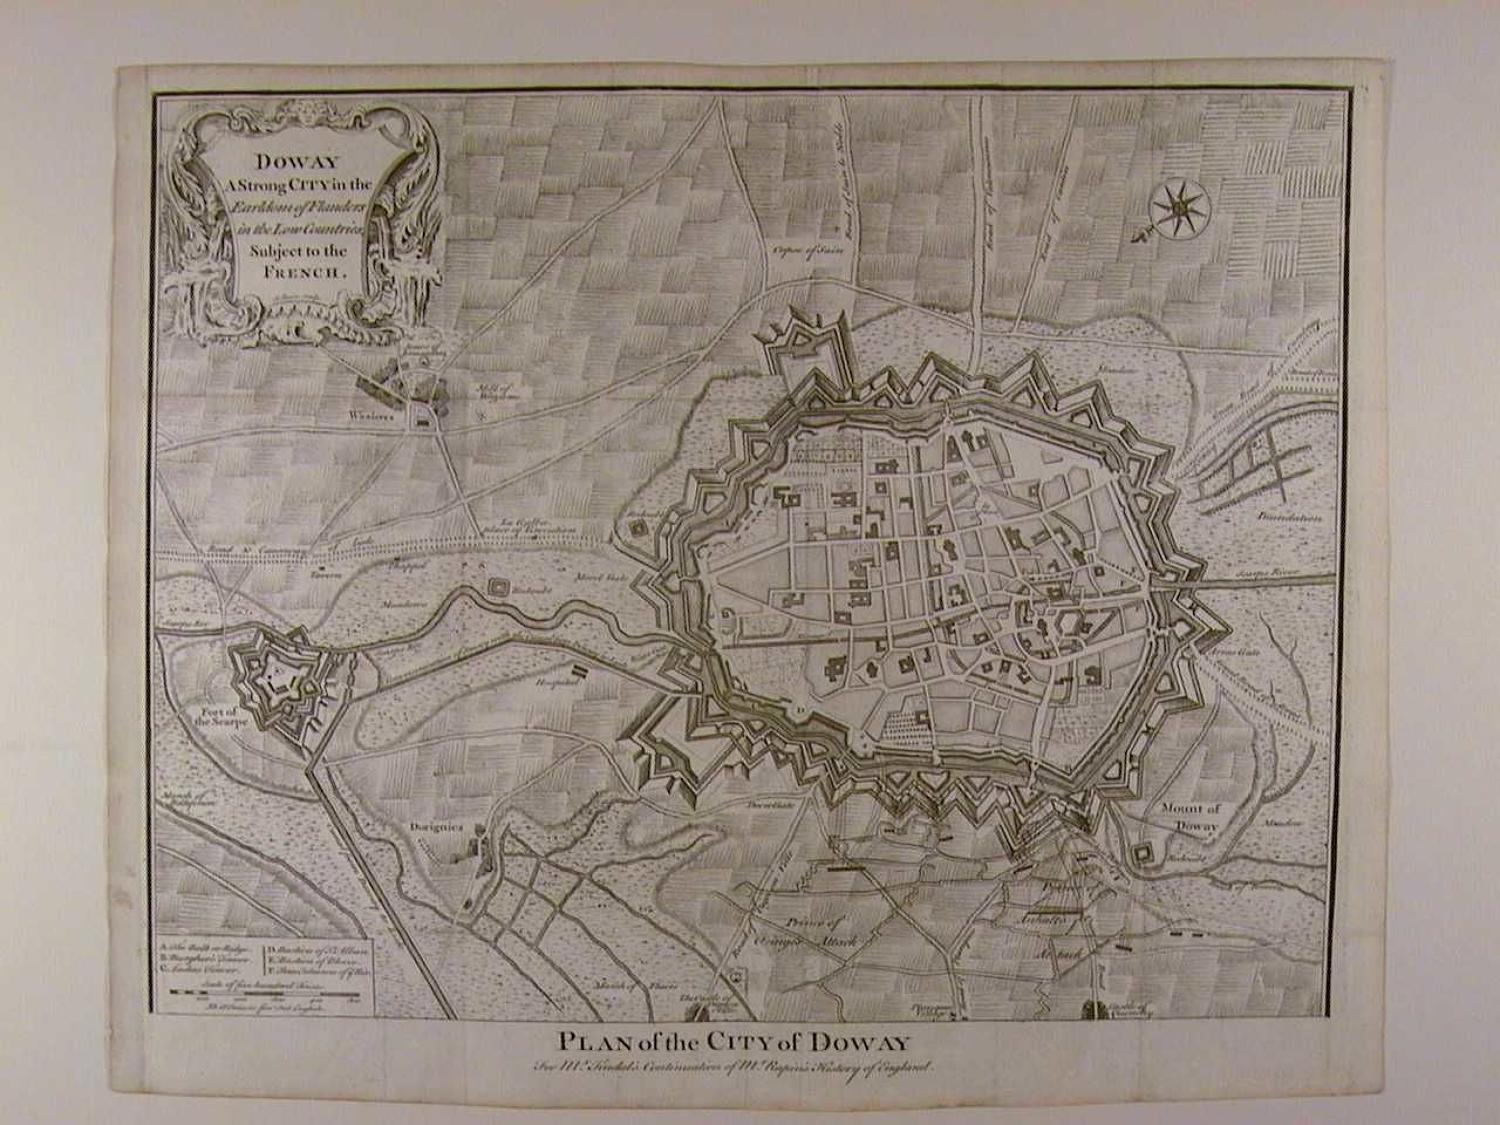 Plan of the City of Doway by Isaac Basire